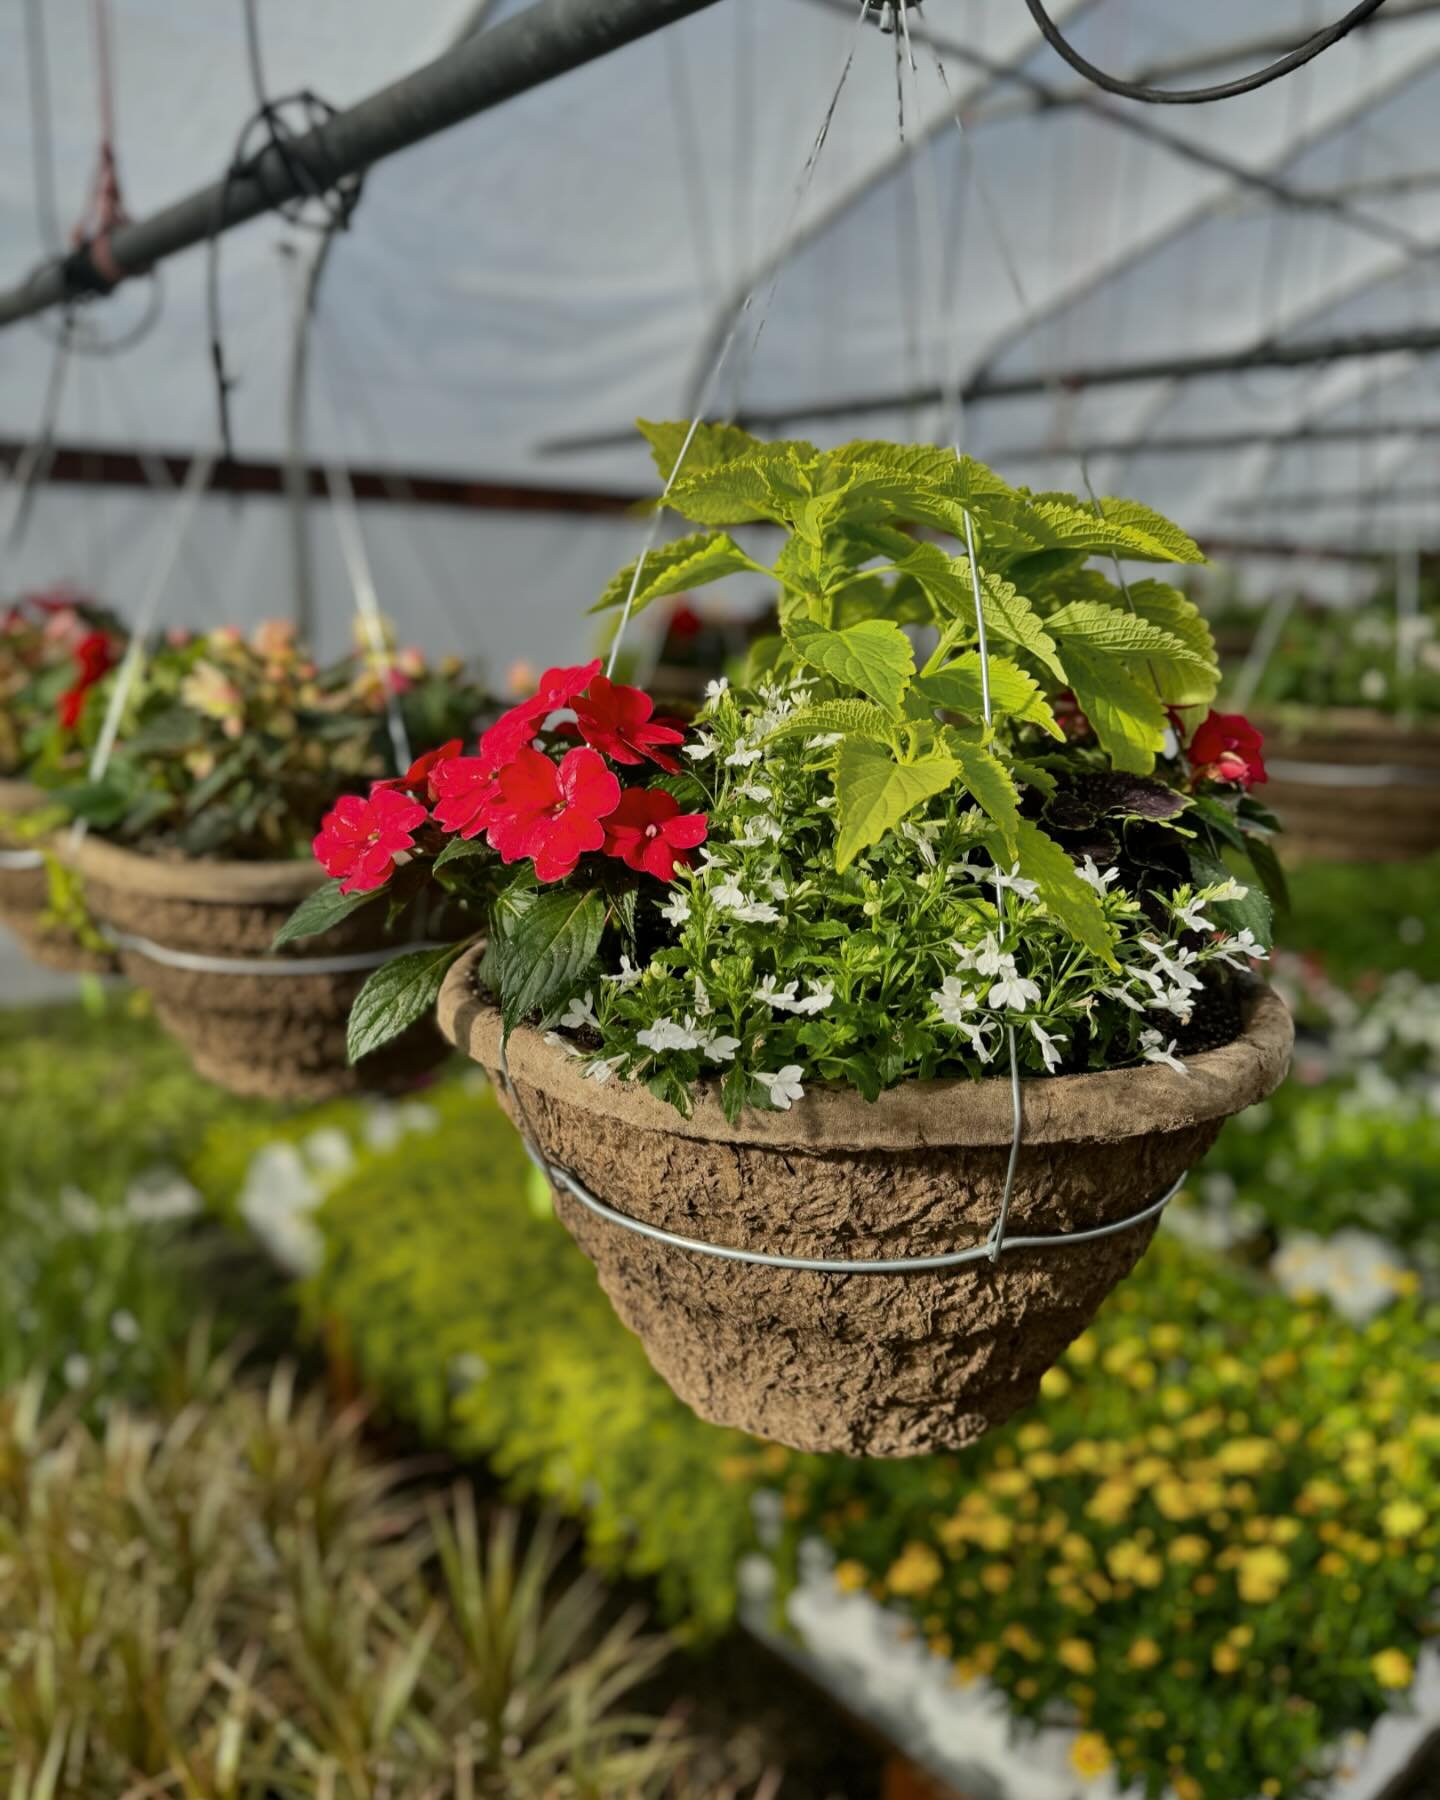 💐 Elevate your outdoor space this Spring with a hanging flower basket!

Did you know that all of our annuals in our baskets are planted and grown in our greenhouse? We take pride in cultivating all our annuals from seed, right on-site. Every plant a